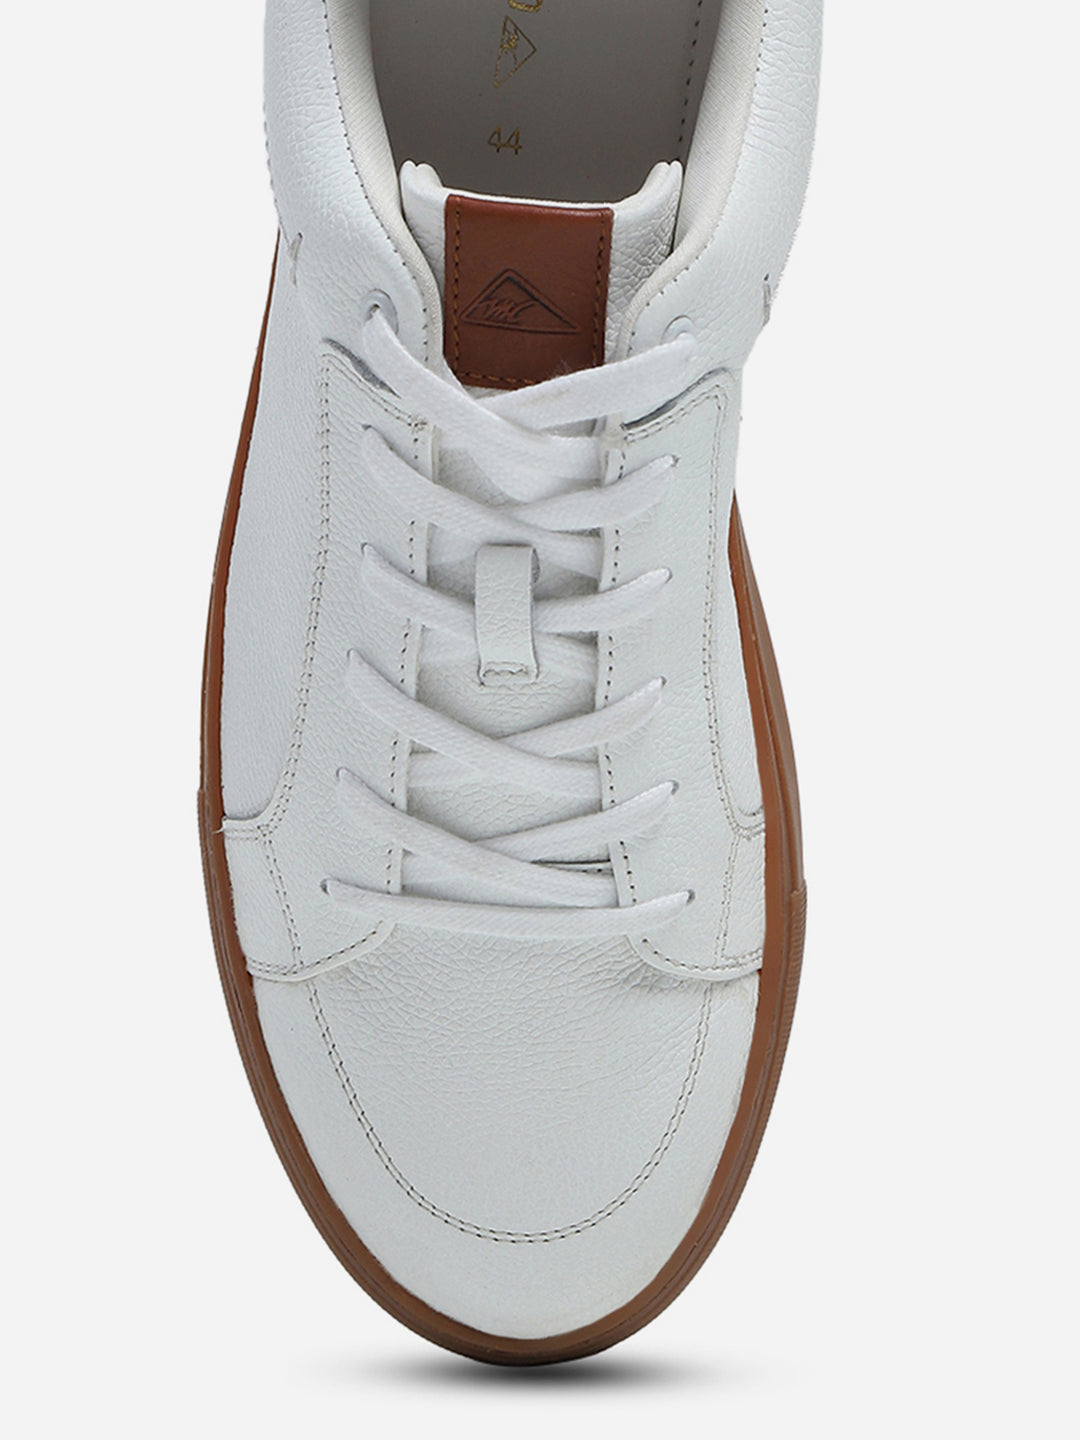 Men White Lace Up Genuine Leather Casual Sneakers